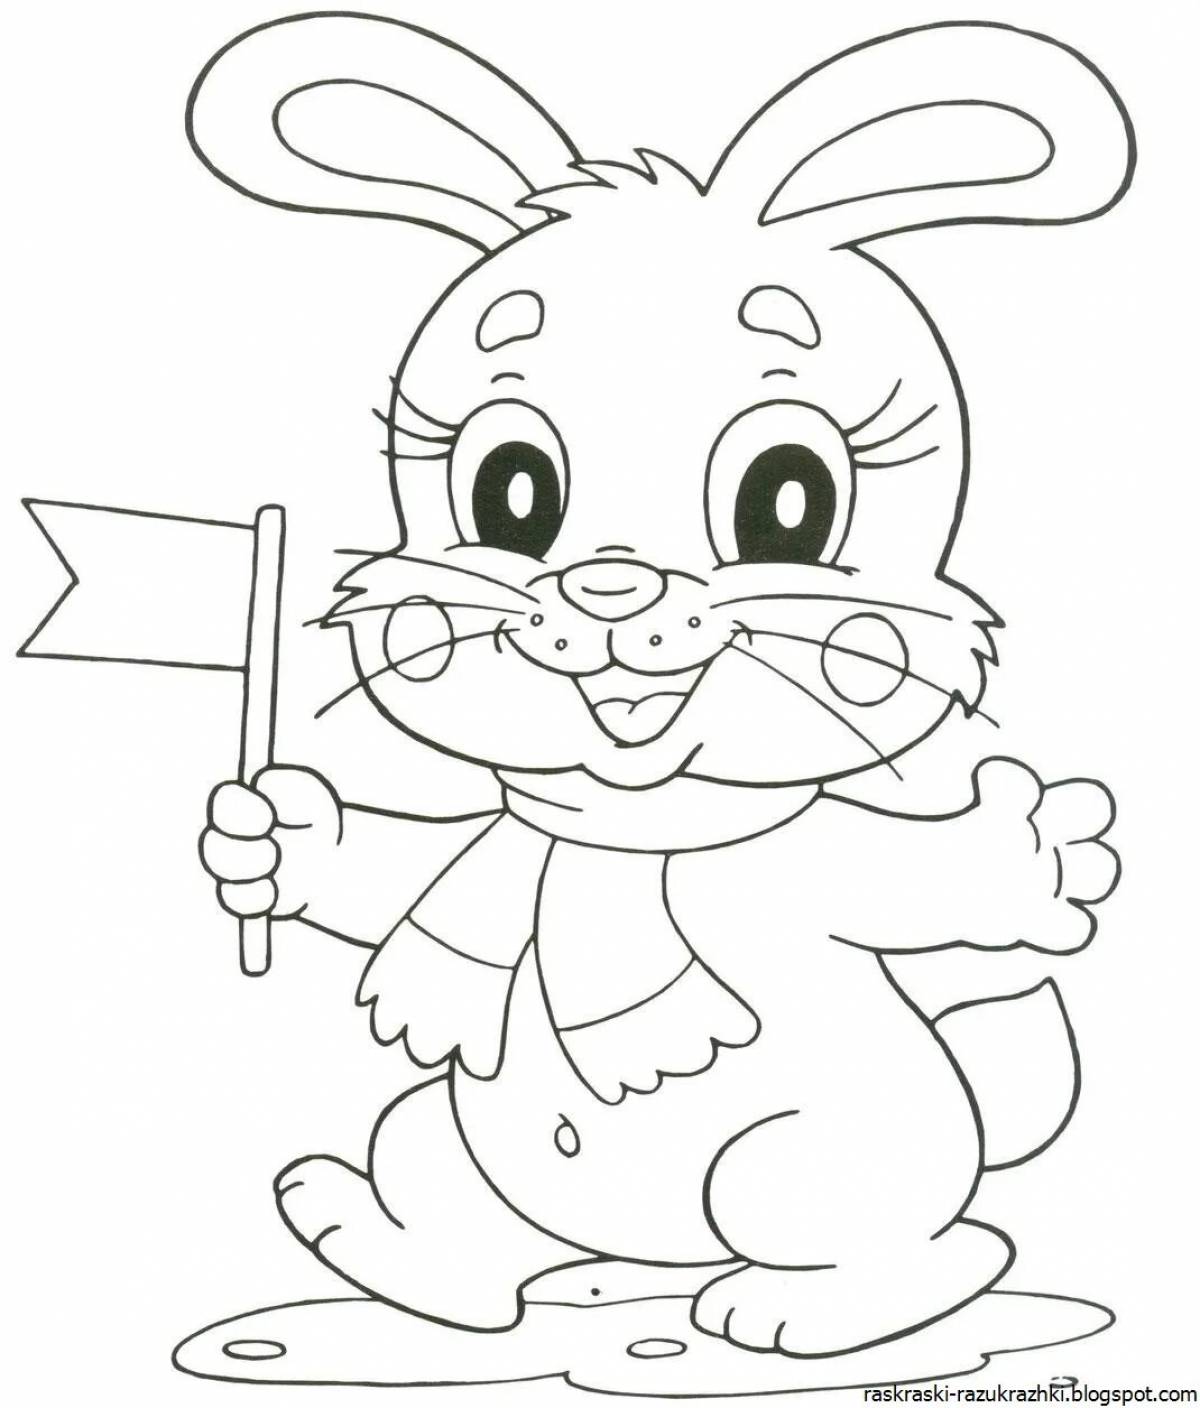 Glitter Bunny Coloring Page for Toddlers